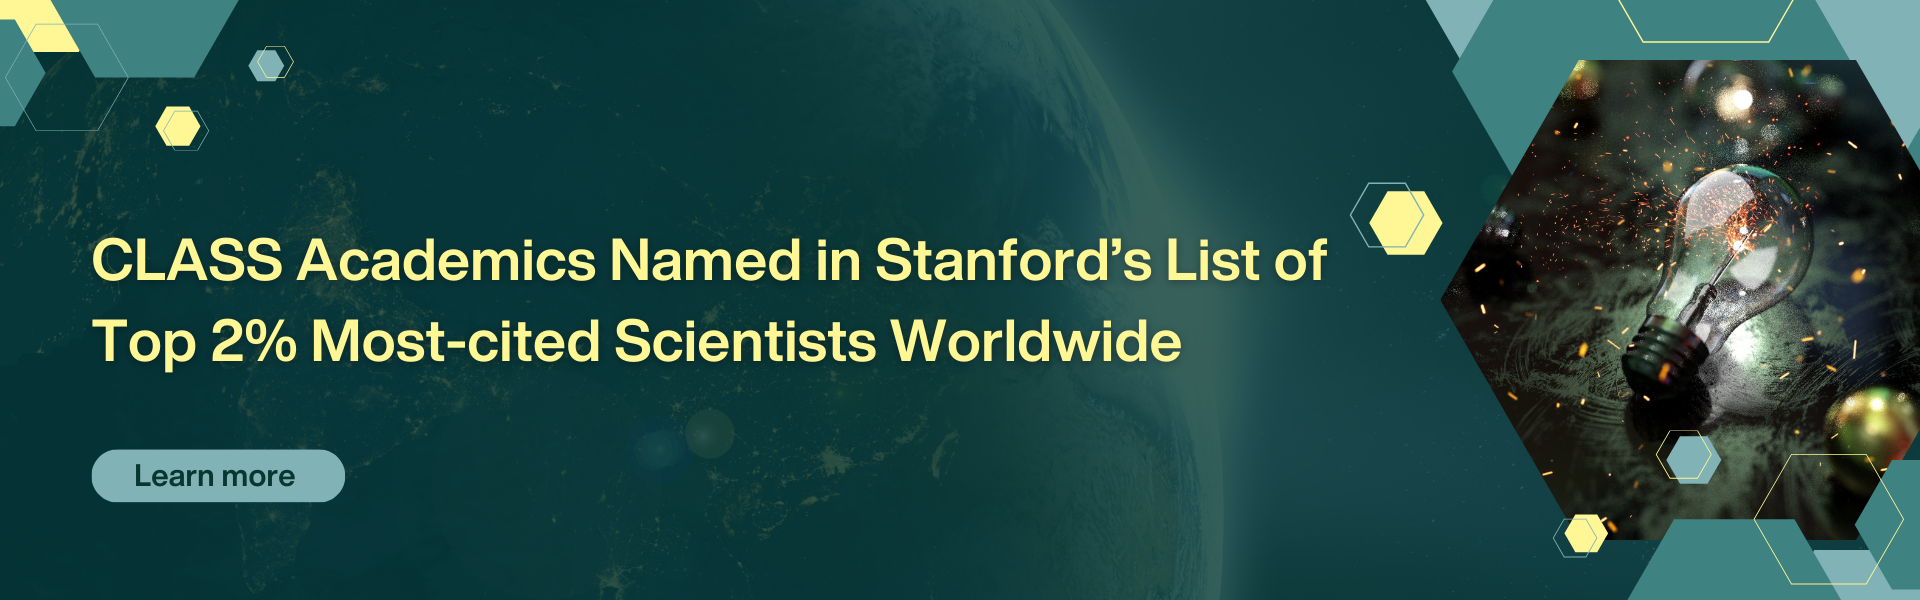 CLASS Academics Named in Stanford’S List of Top 2% Most-cited Scientists Worldwide